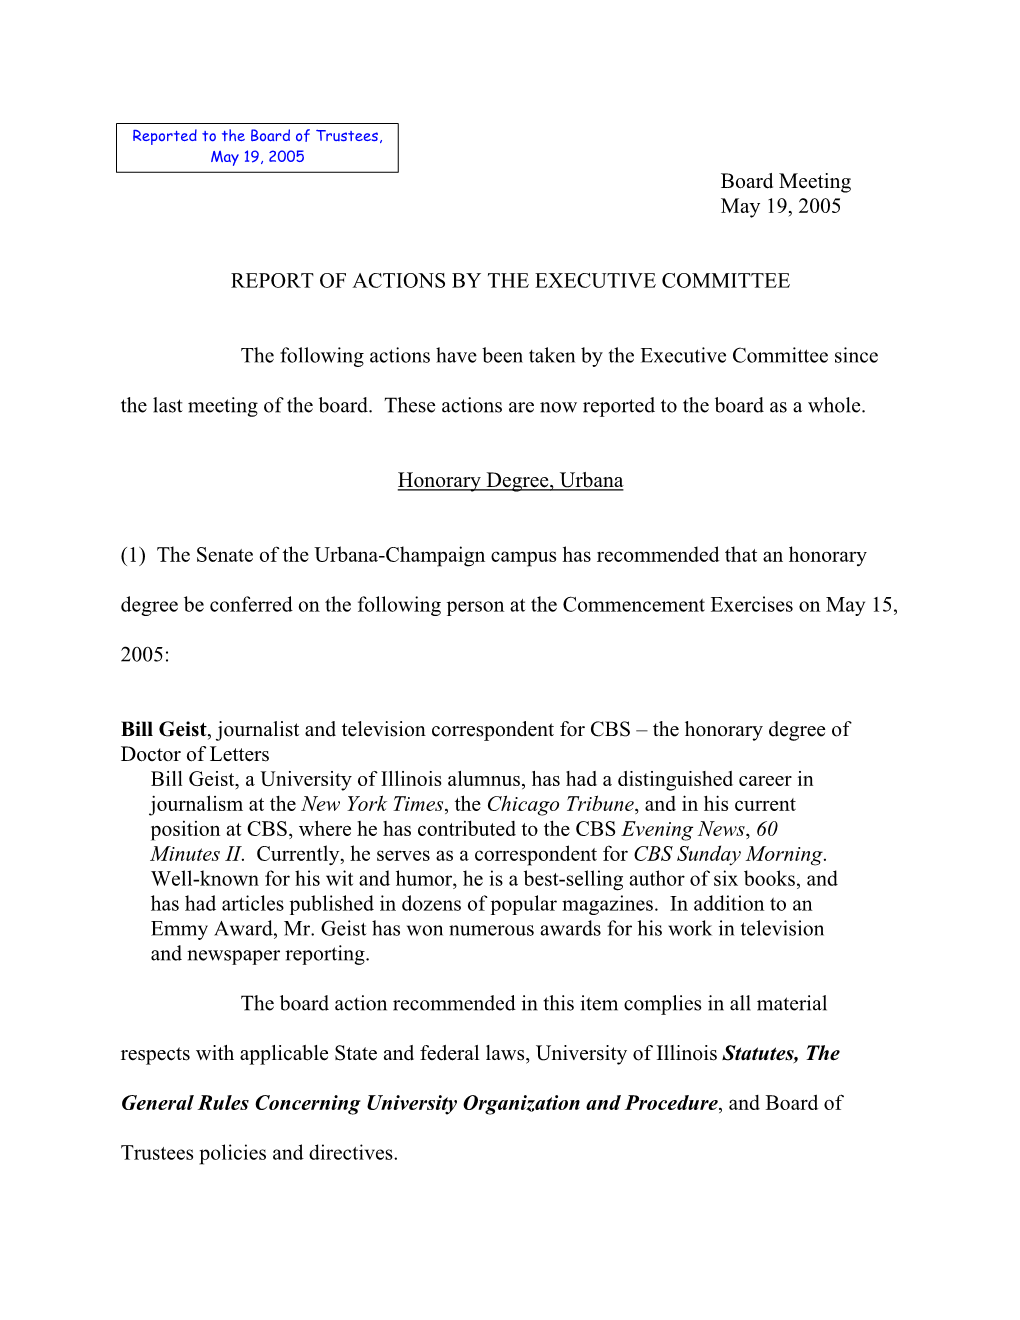 Board Meeting May 19, 2005 REPORT of ACTIONS by THE